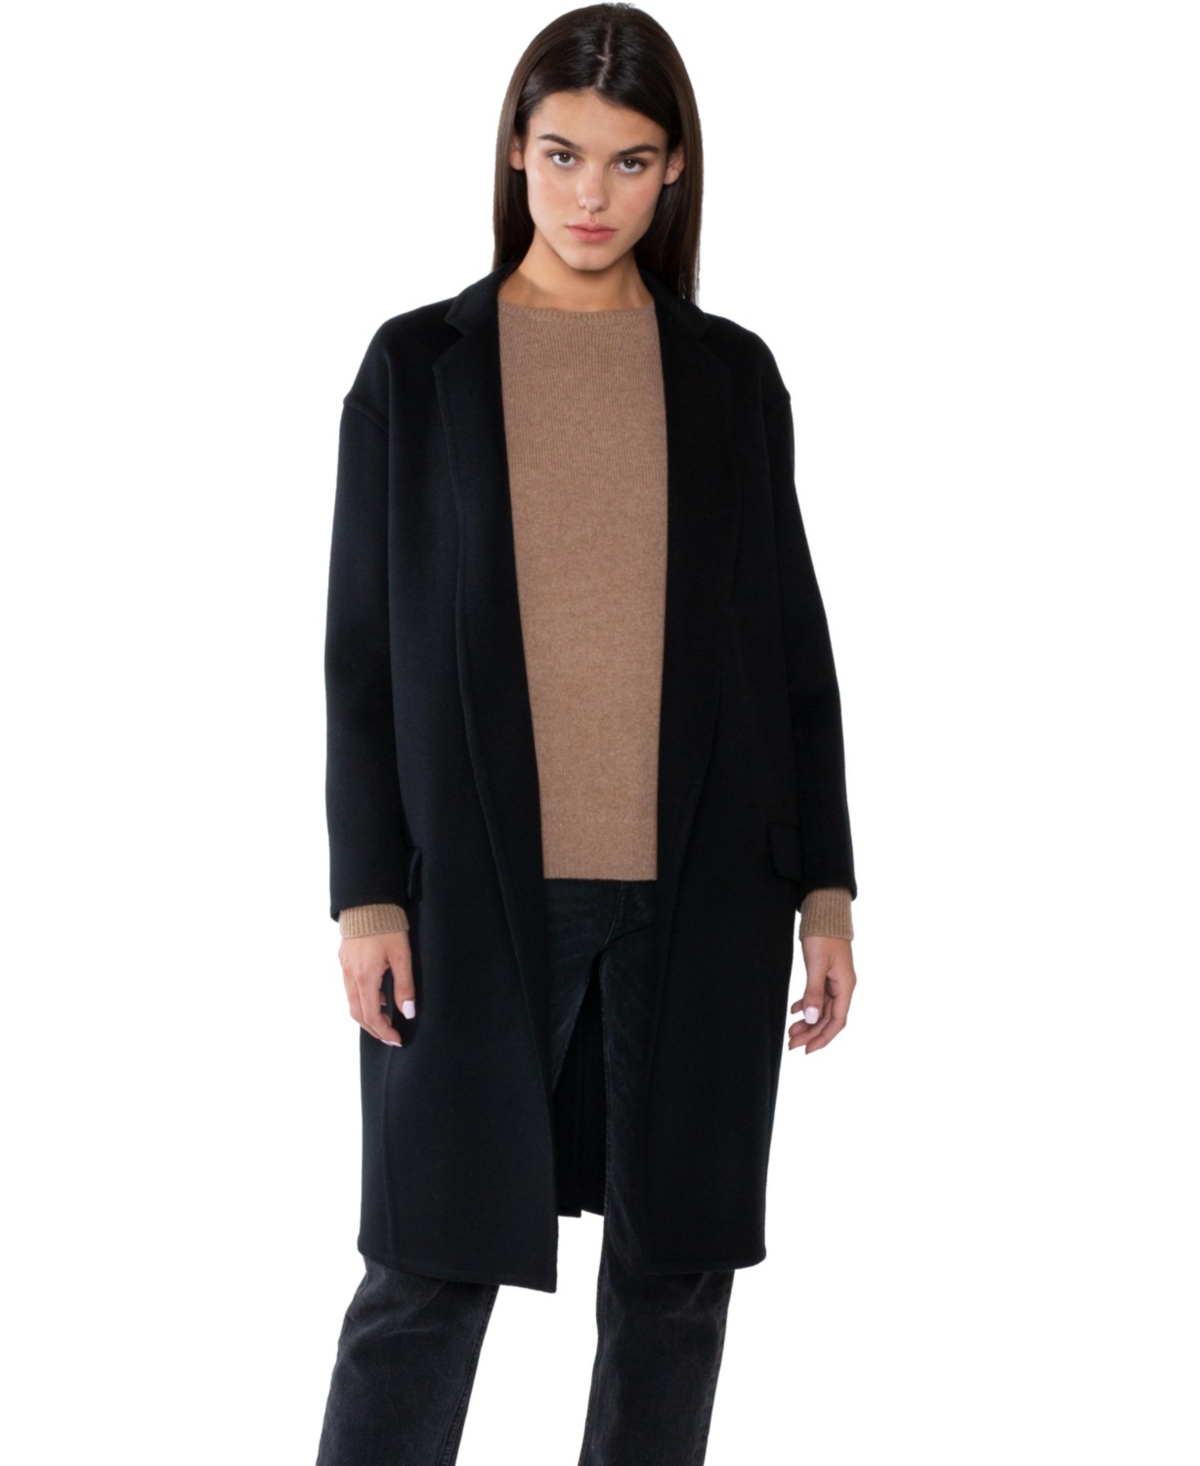 Women's Cashmere Wool Double Face Overcoat with Belt - Camel